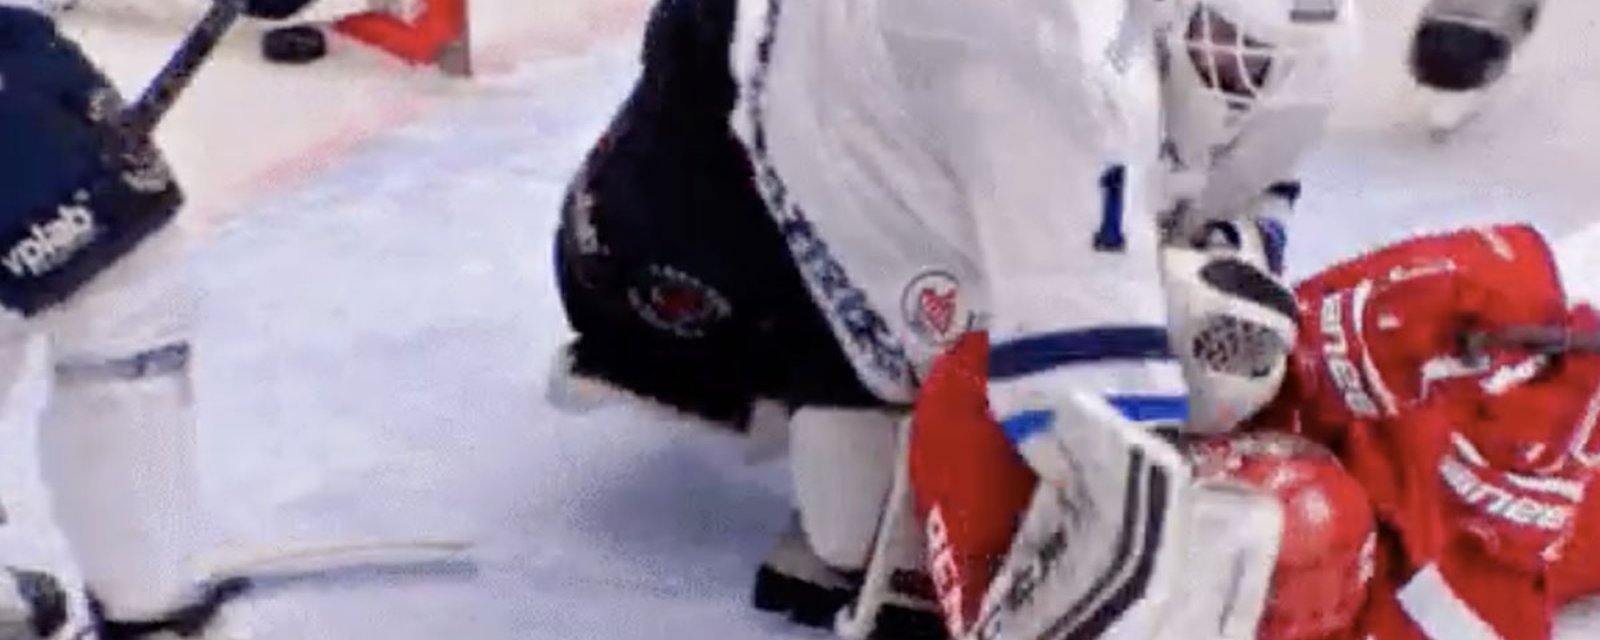 Breaking: Former NHL goalie suspended for sucker-punching a player!